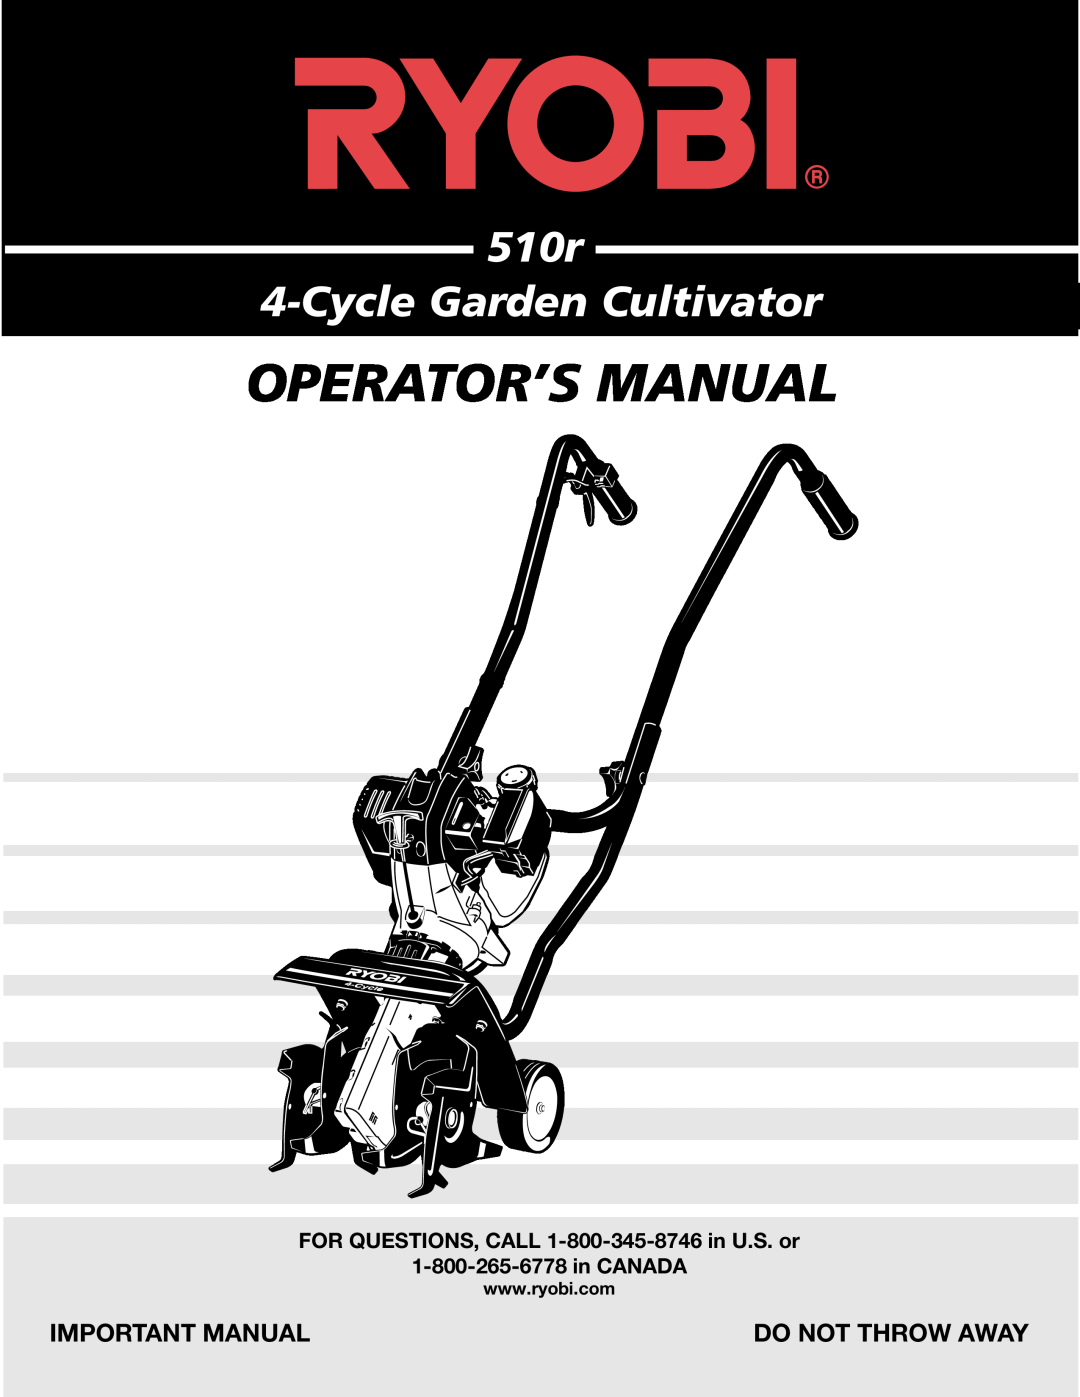 Ryobi Outdoor 510r manual Important Manual, FOR QUESTIONS, CALL 1-800-345-8746 in U.S. or, Operator’S Manual 